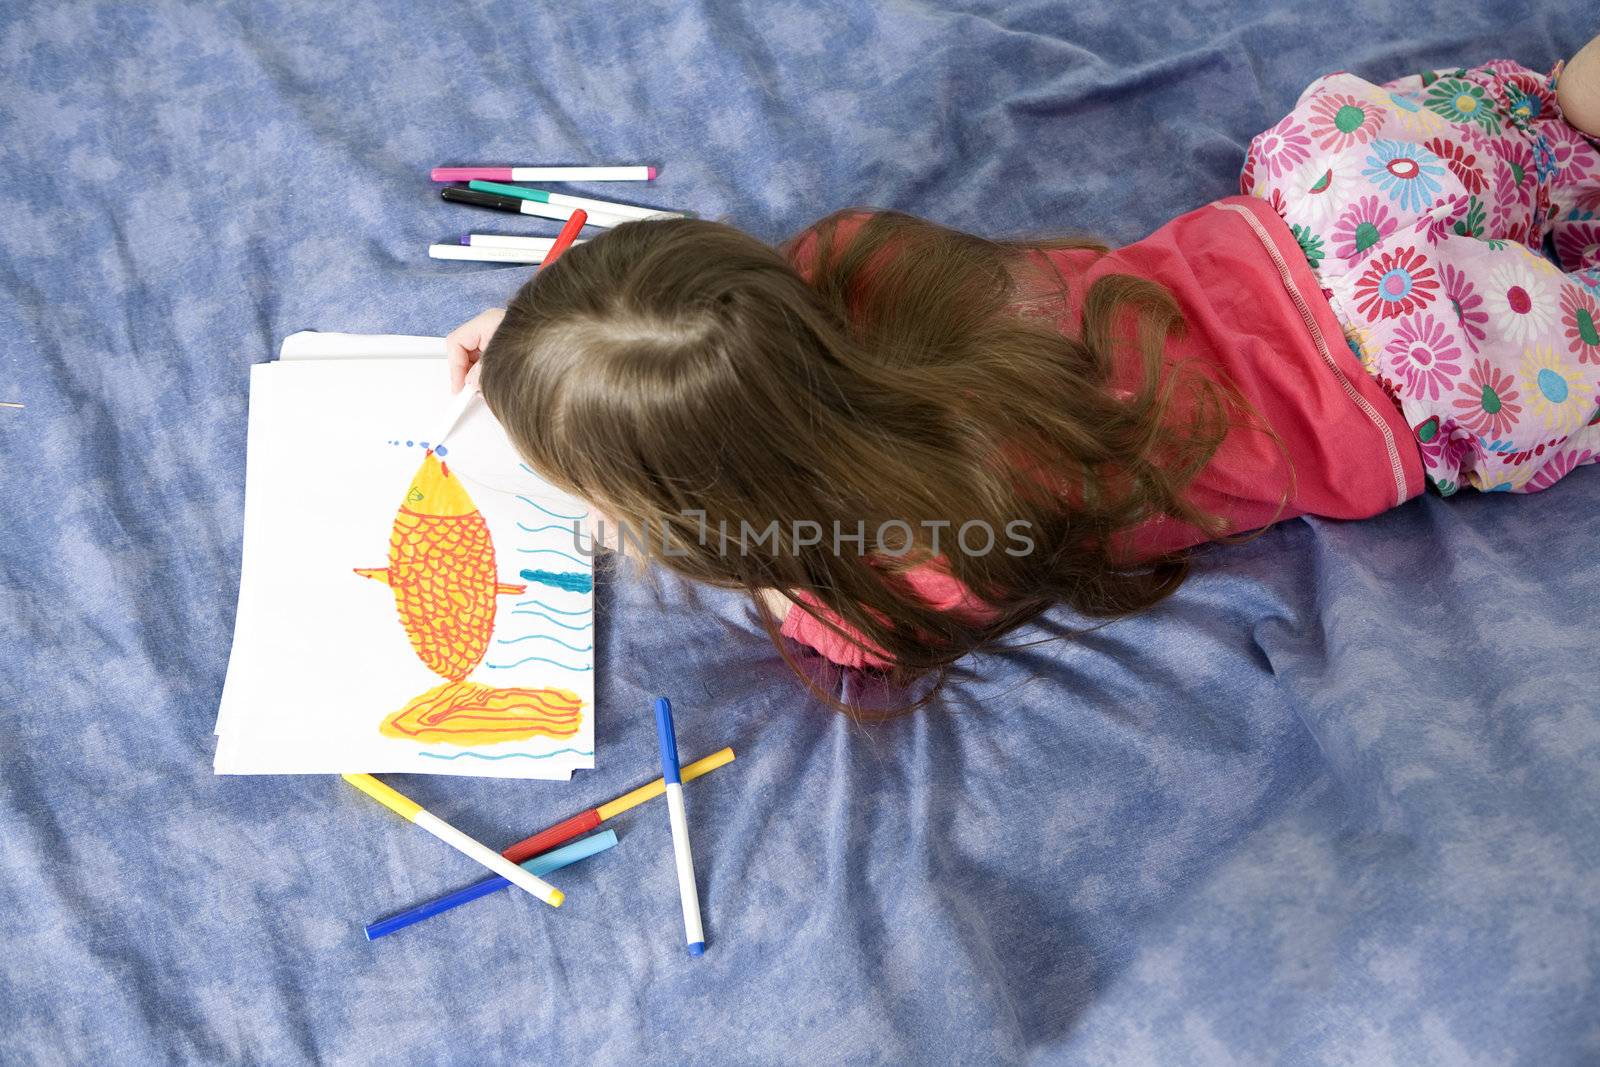 little cute smiling girl seven years old with drawing picture by elenarostunova